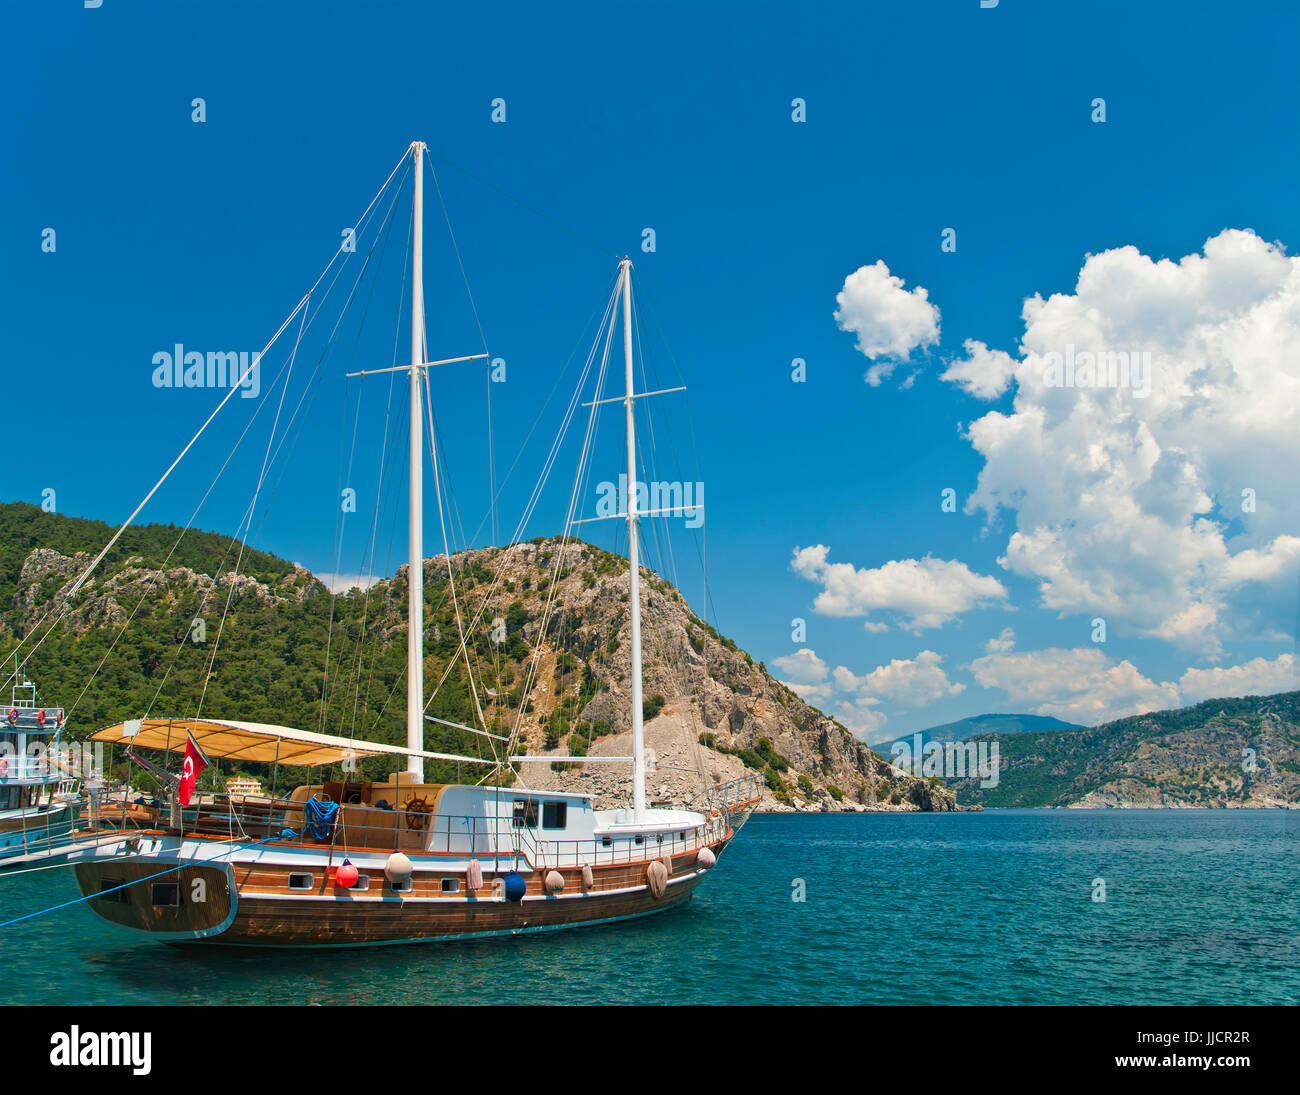 turkish tourist boat moored at Marmaris bay in Aegean sea surrounded by mountains, Turkey Stock Photo